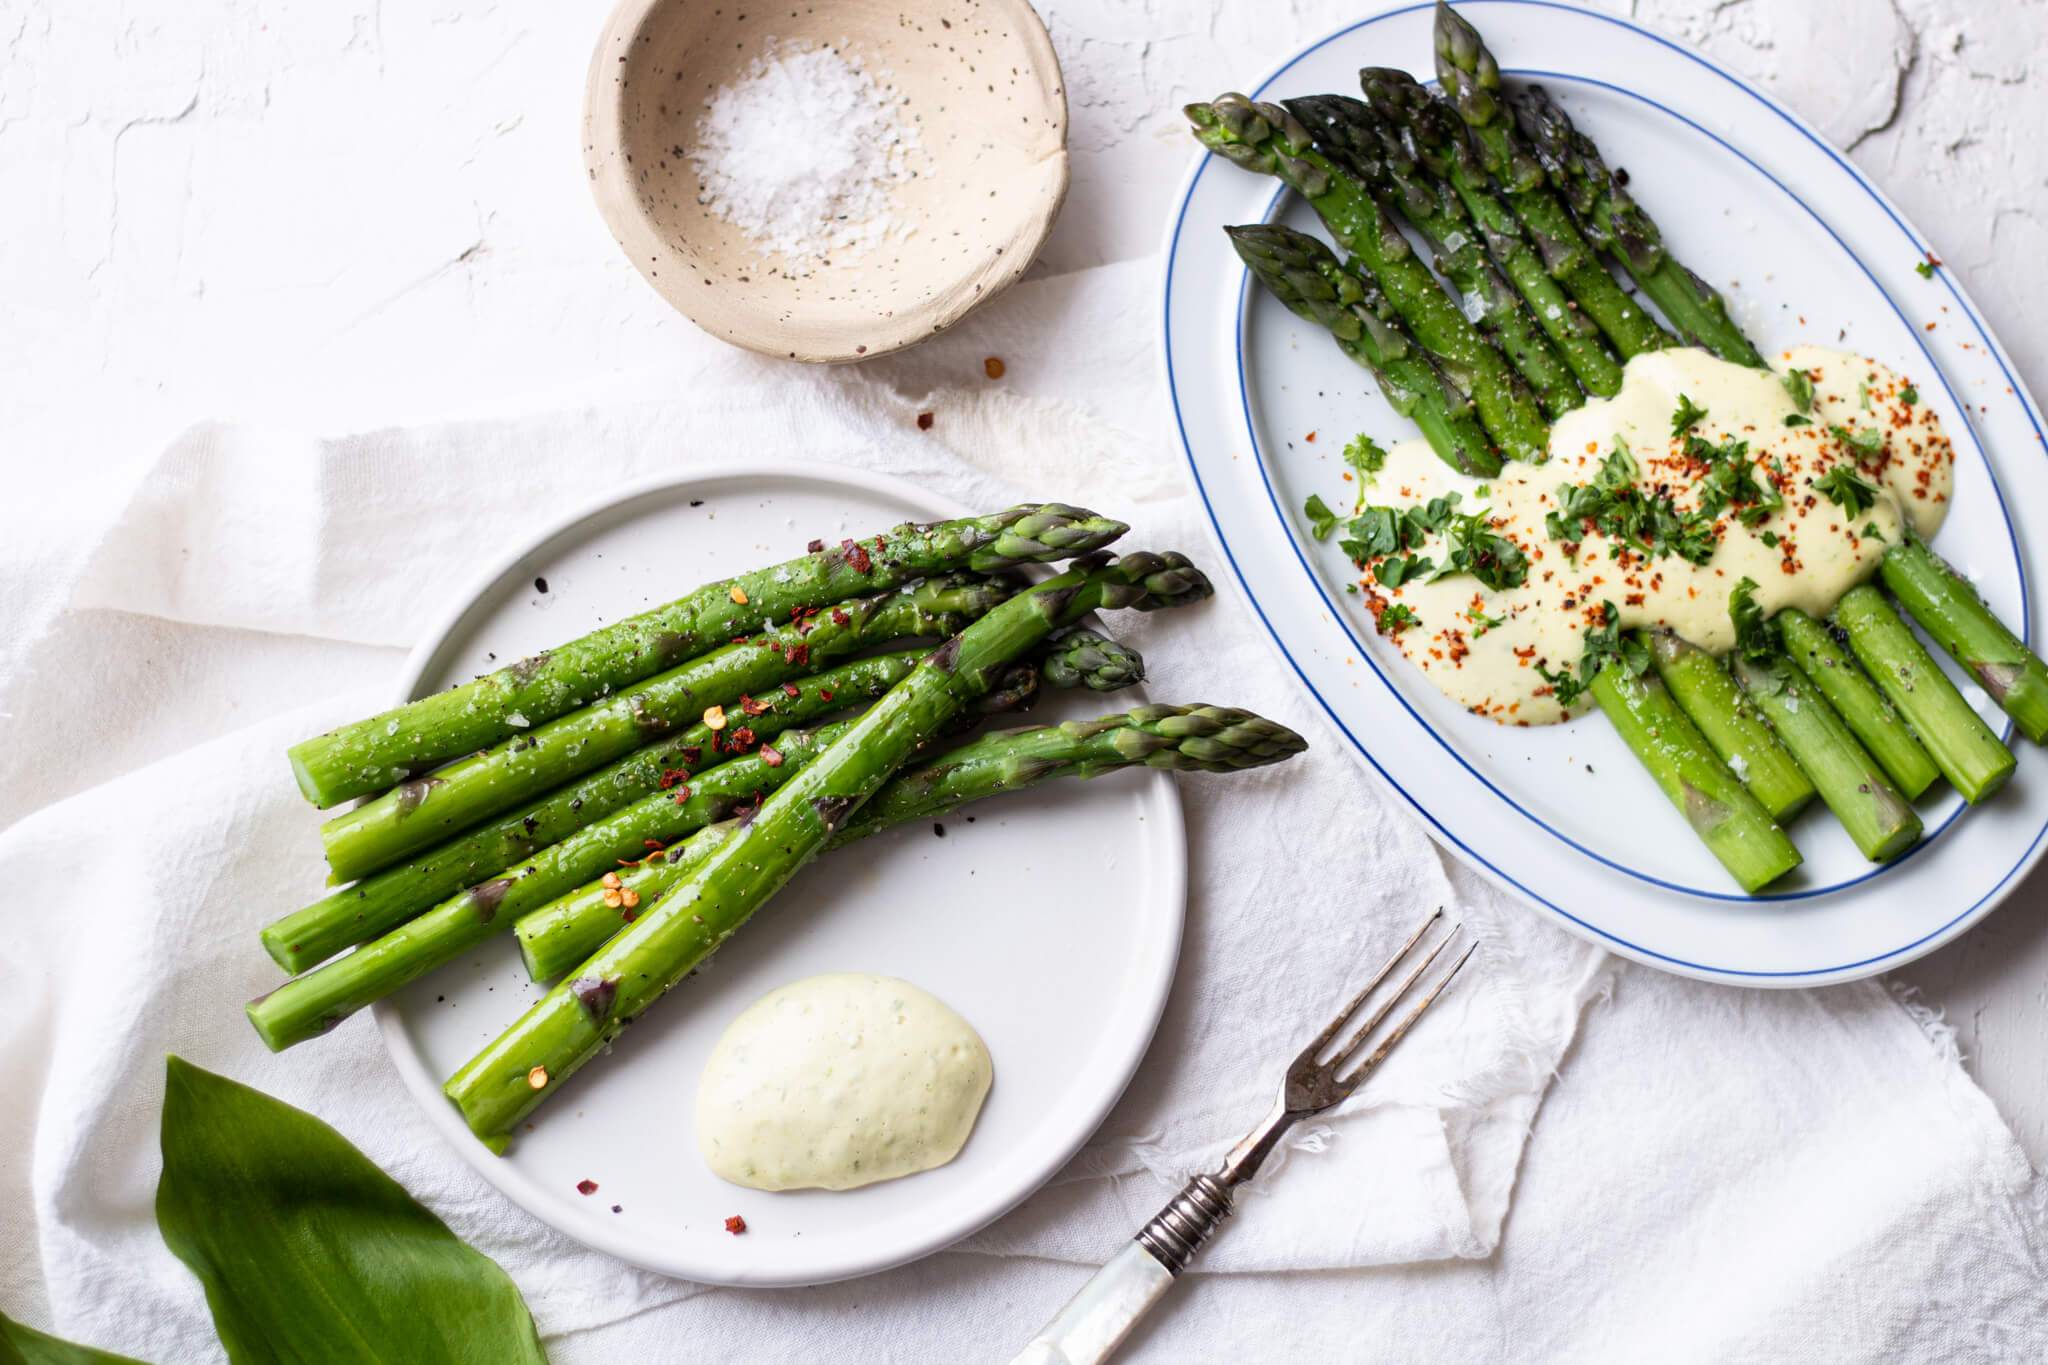 Chilled Asparagus with Wild Garlic Mayo